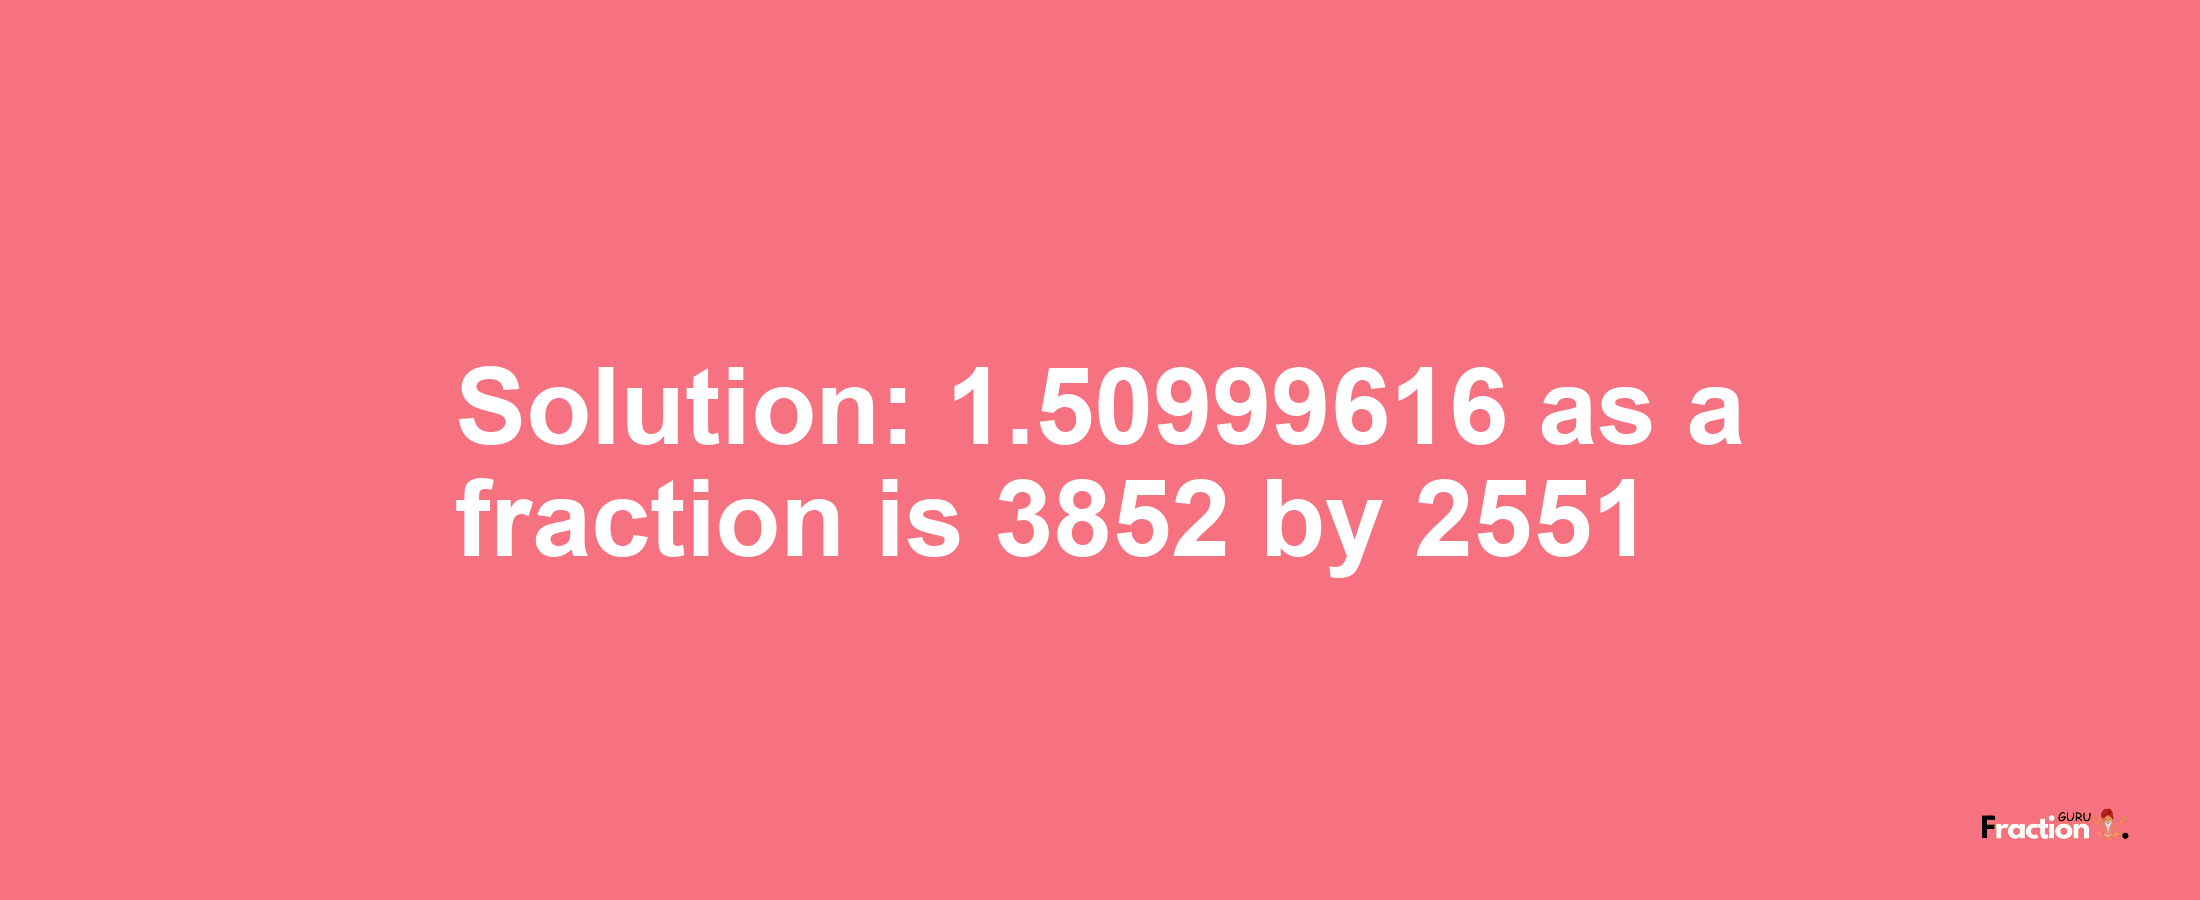 Solution:1.50999616 as a fraction is 3852/2551